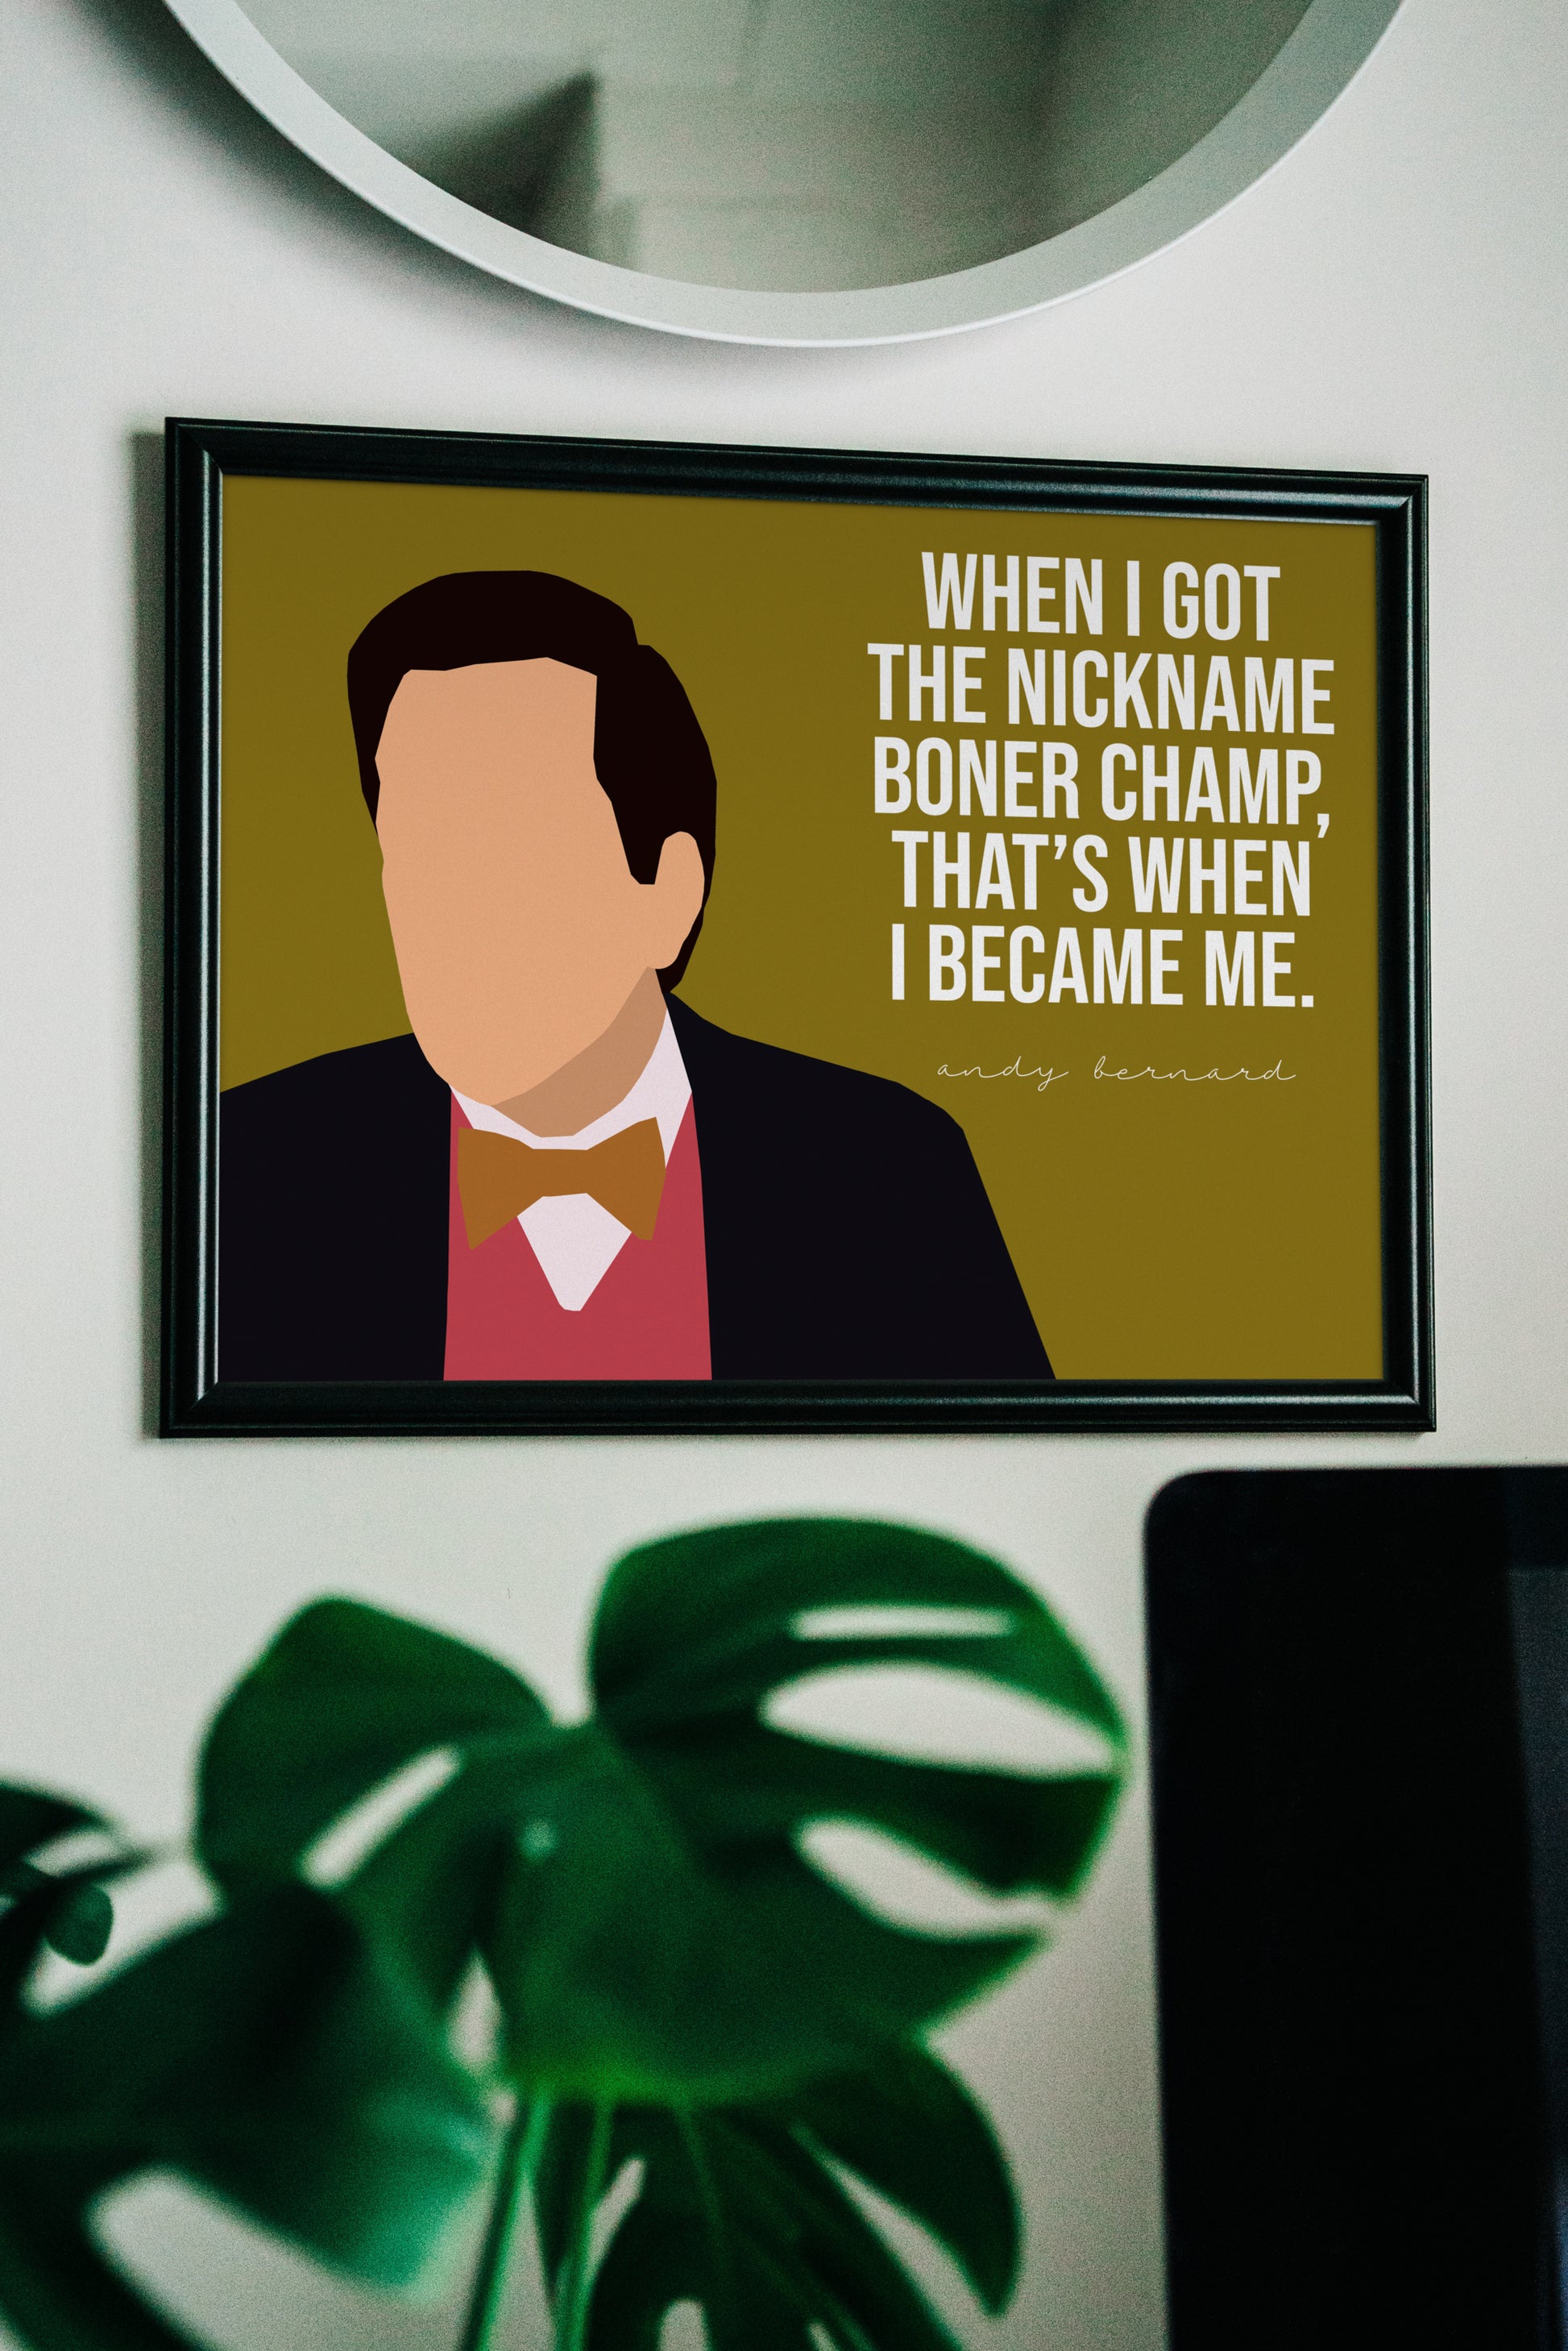 Andy Bernard from The Office tv show with quote, "When I got the nickname Boner Champ, that's when I became me."